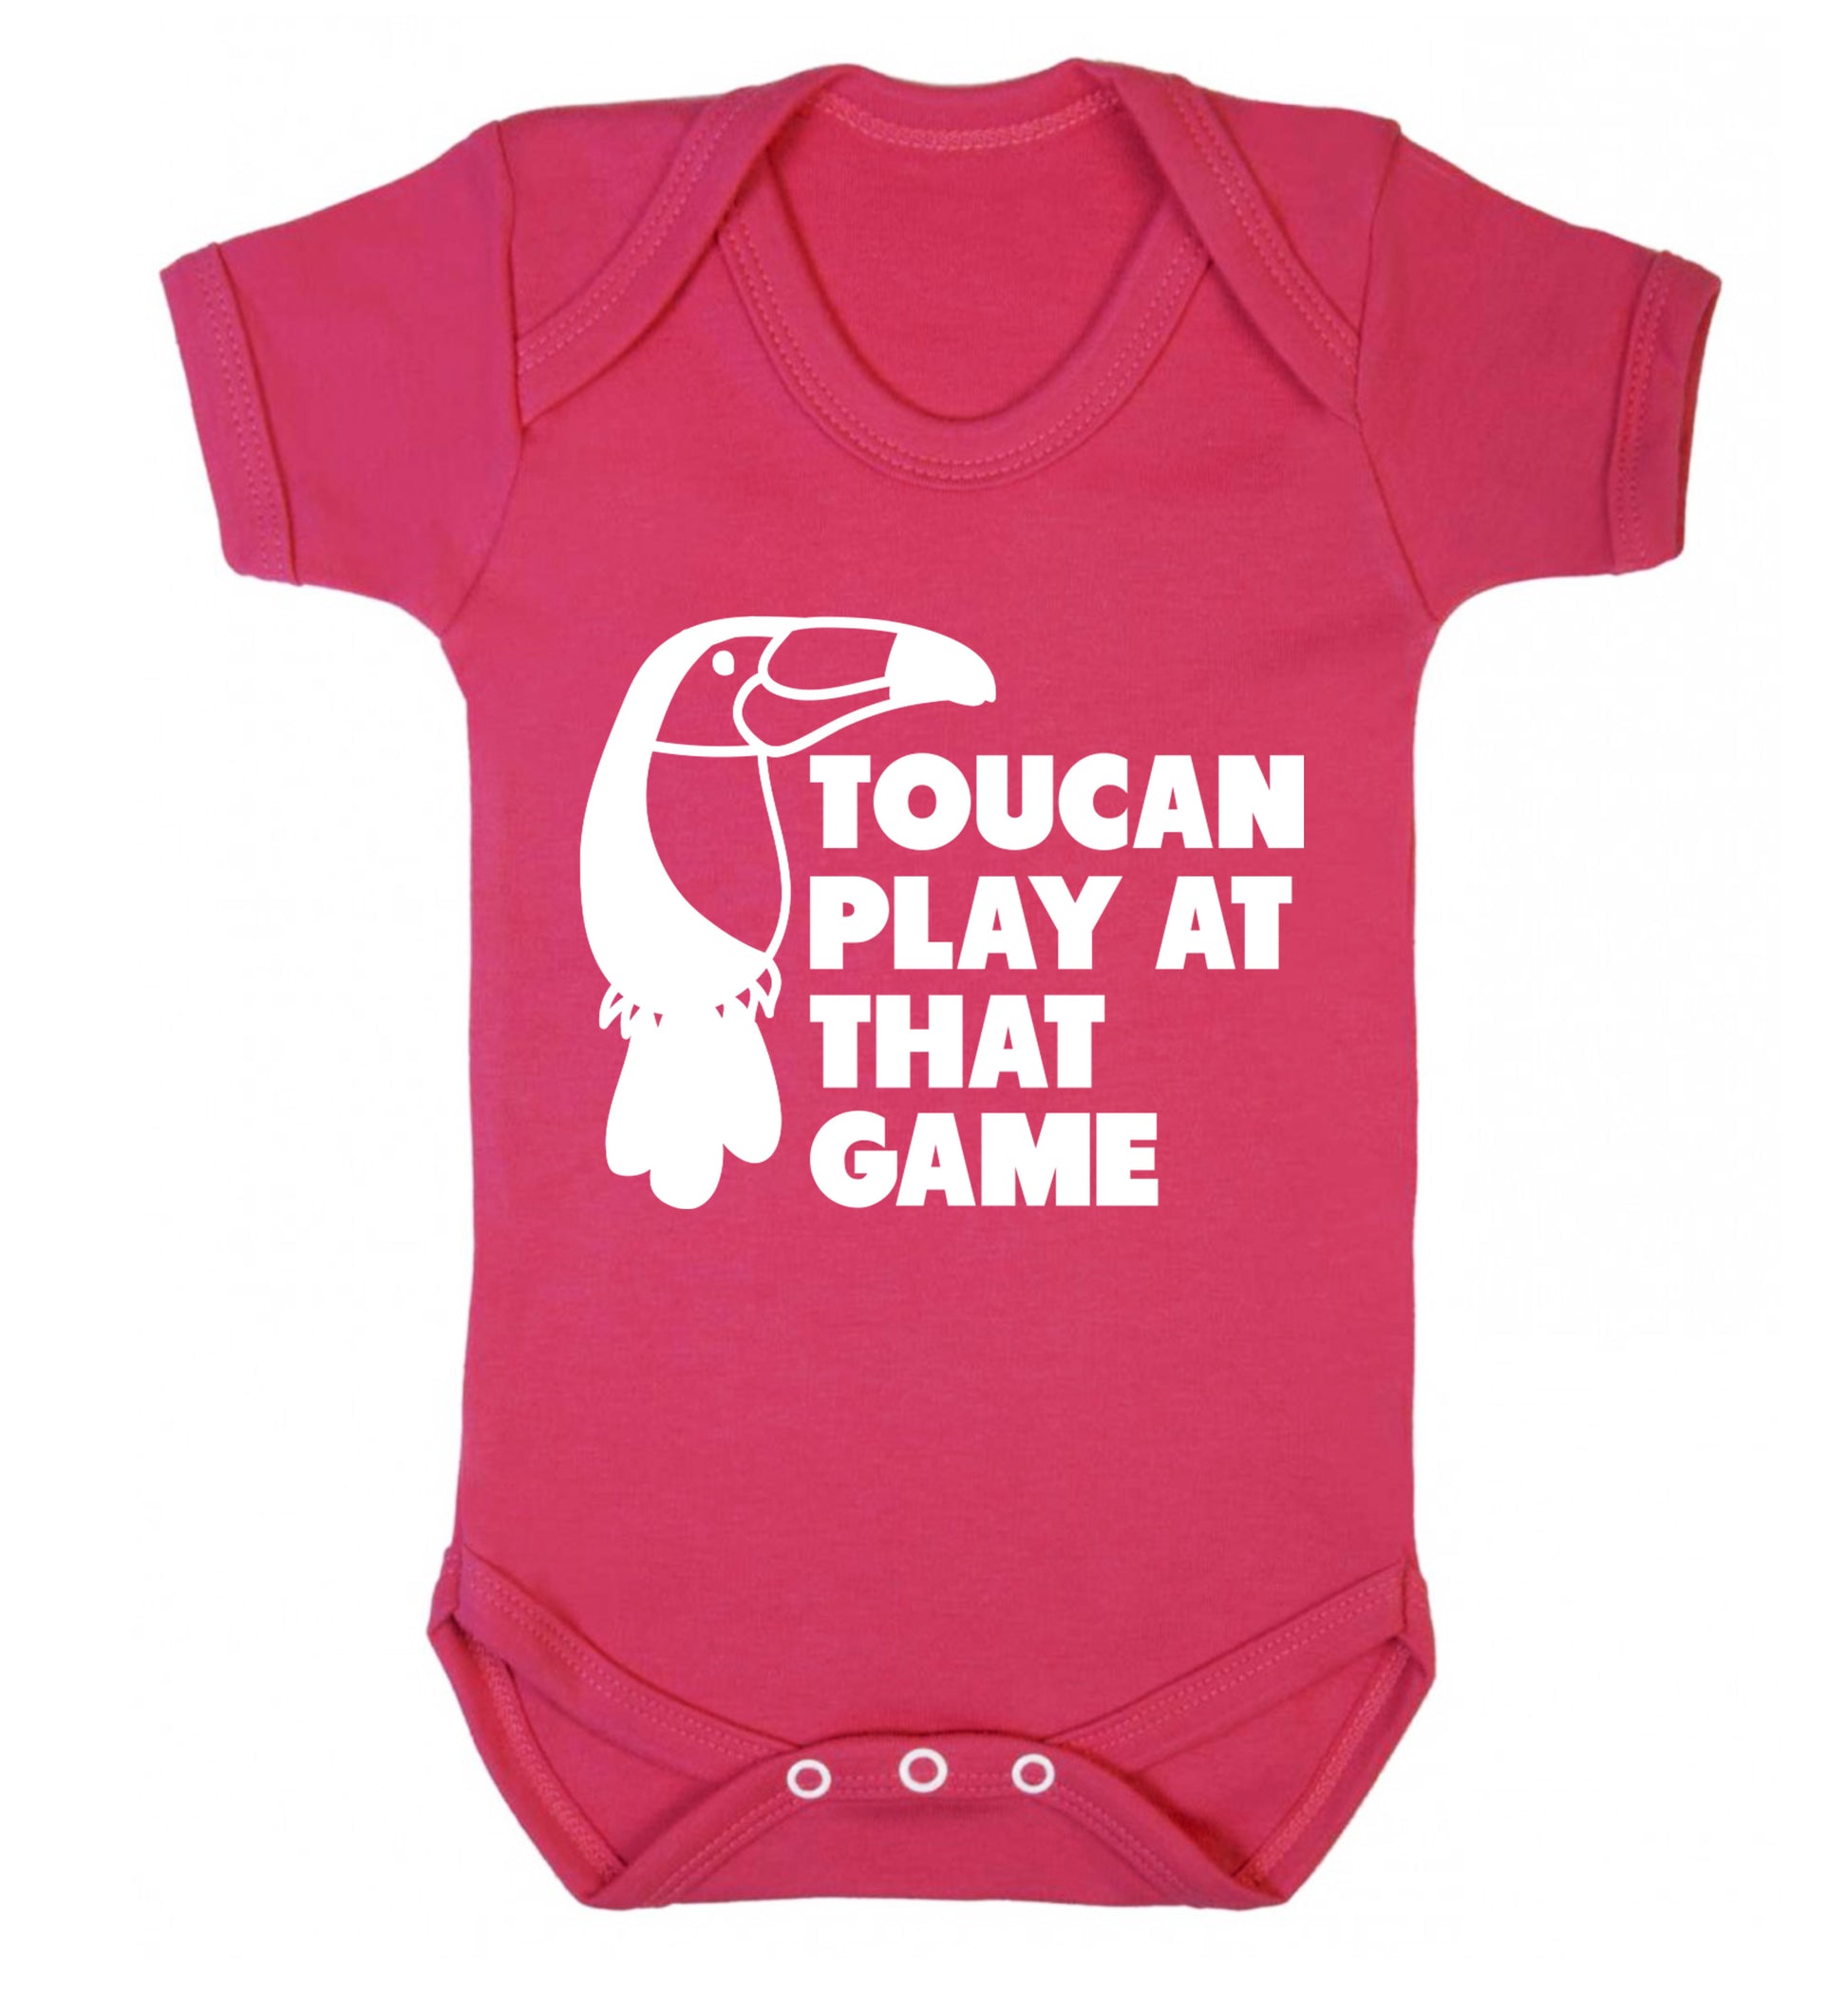 Toucan play at that game Baby Vest dark pink 18-24 months